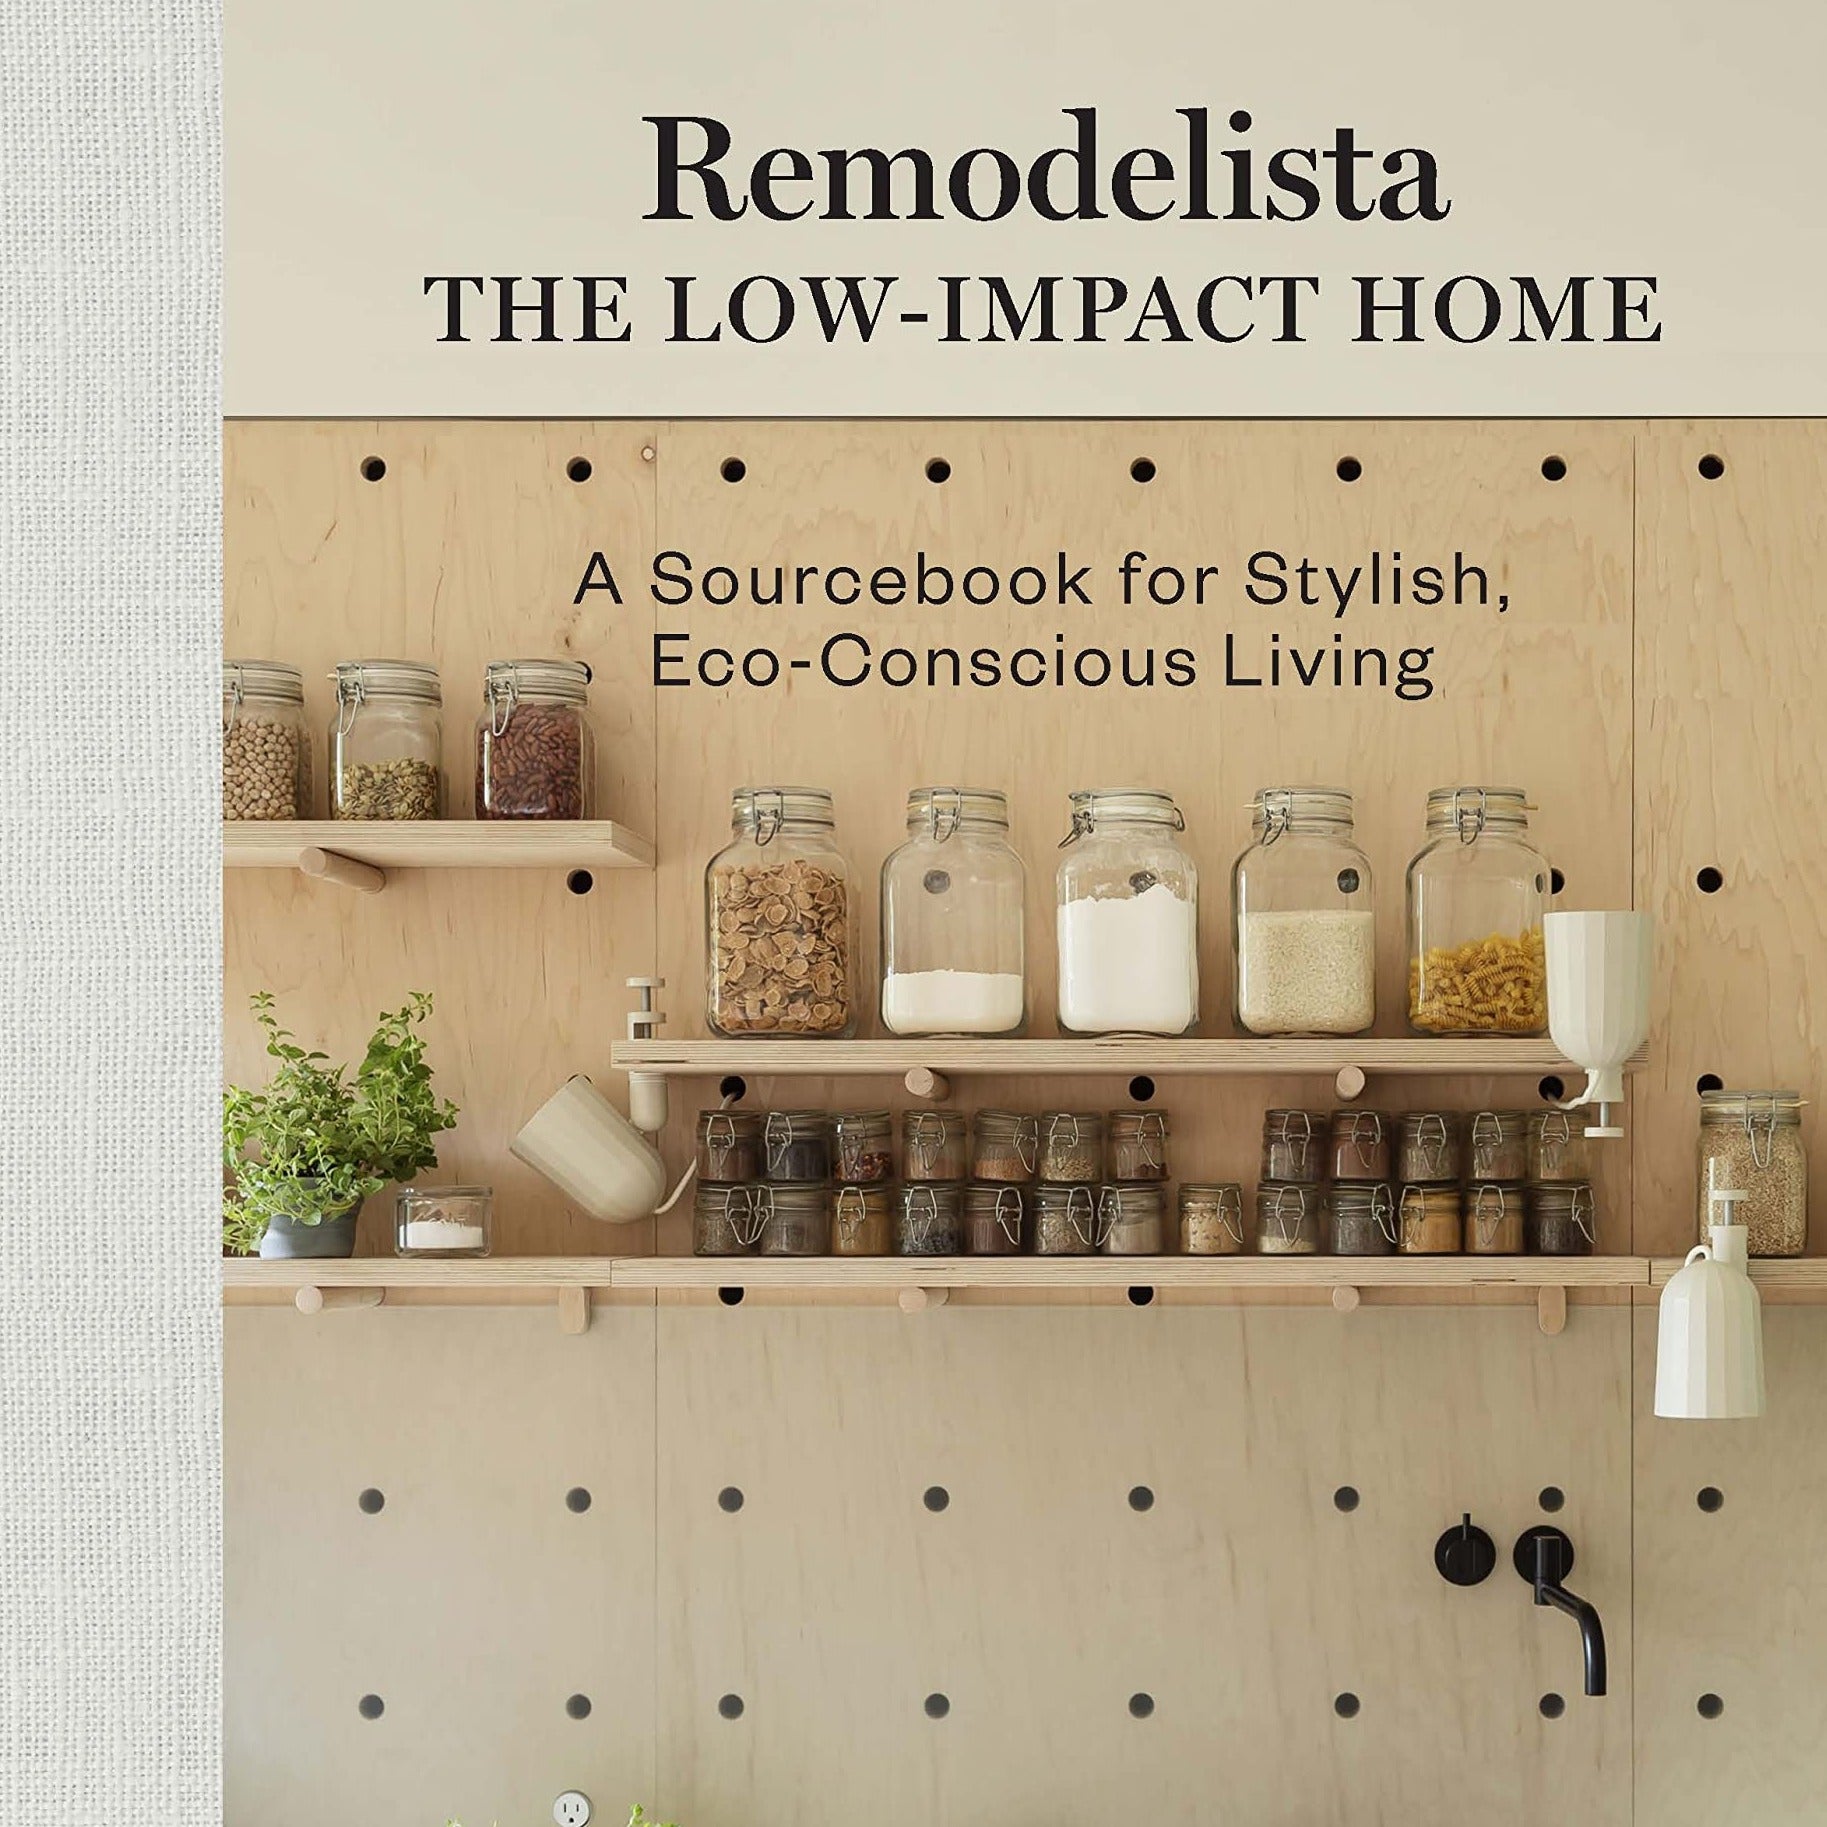 10 Easy Pieces: Olive Oil Containers - Remodelista